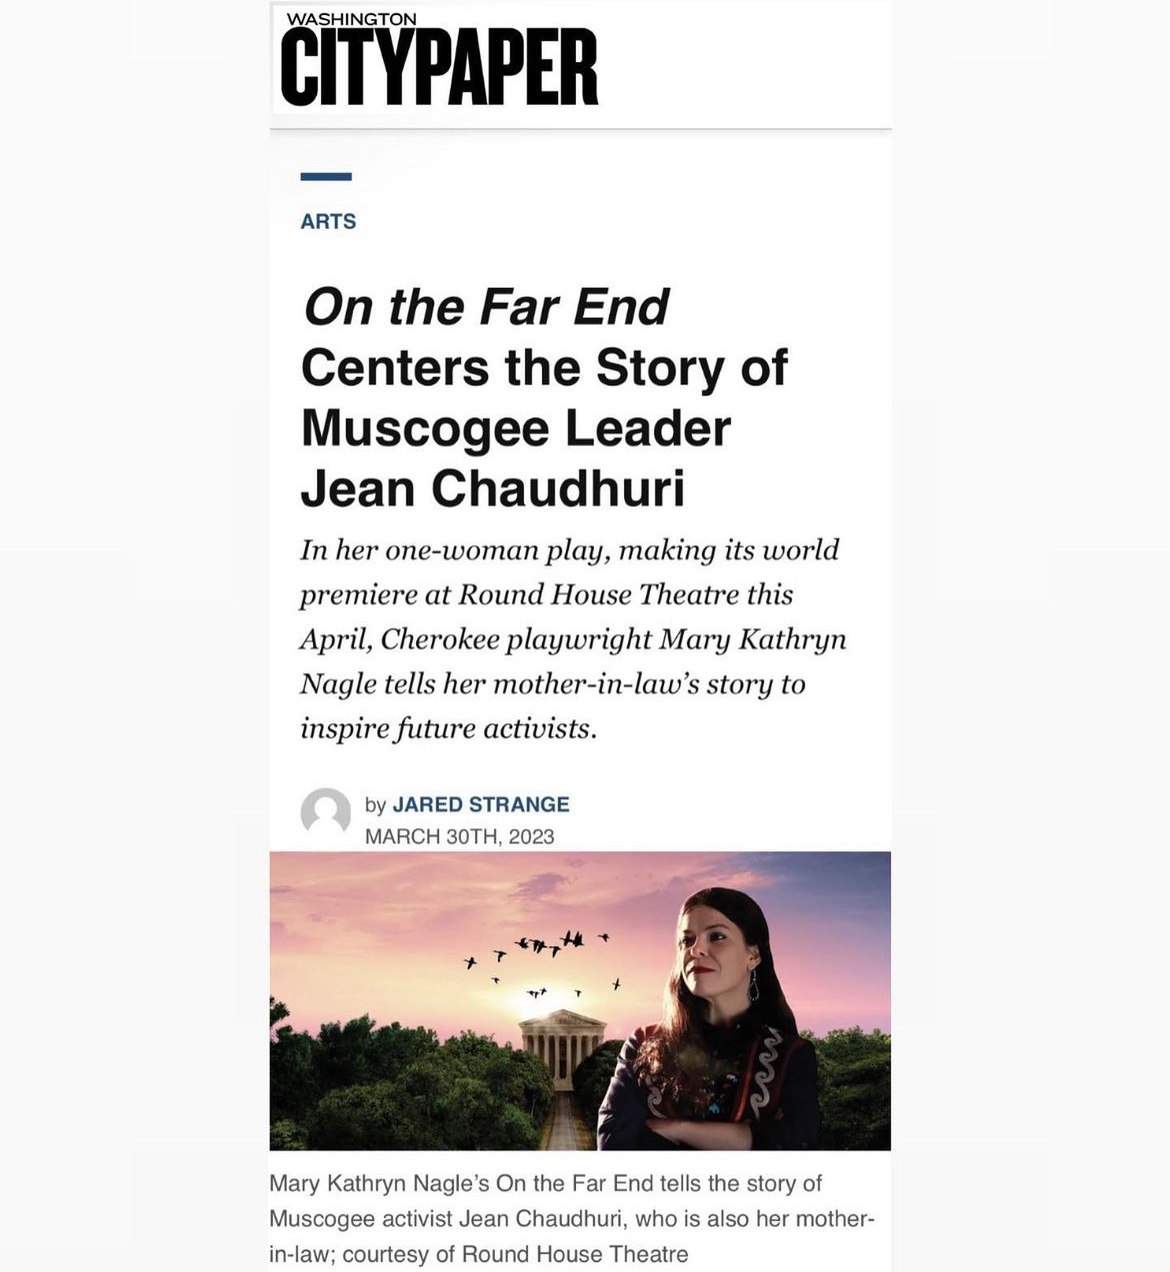 Washington City Paper Feature: On the Far End Centers the Story of Muscogee Leader Jean Chaudhuri